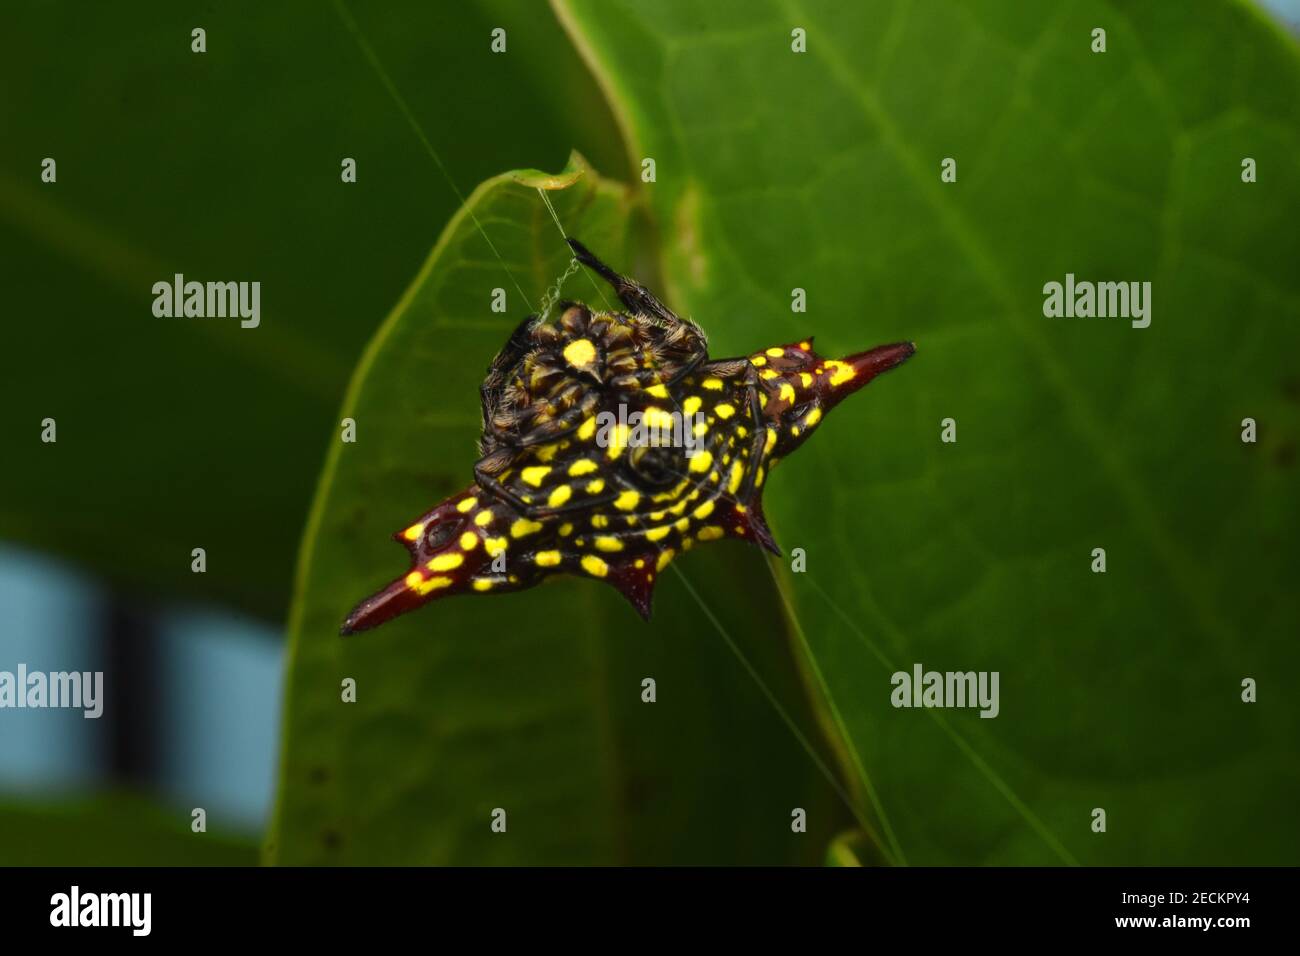 Yellow spiny orb spider, abdominal view Stock Photo